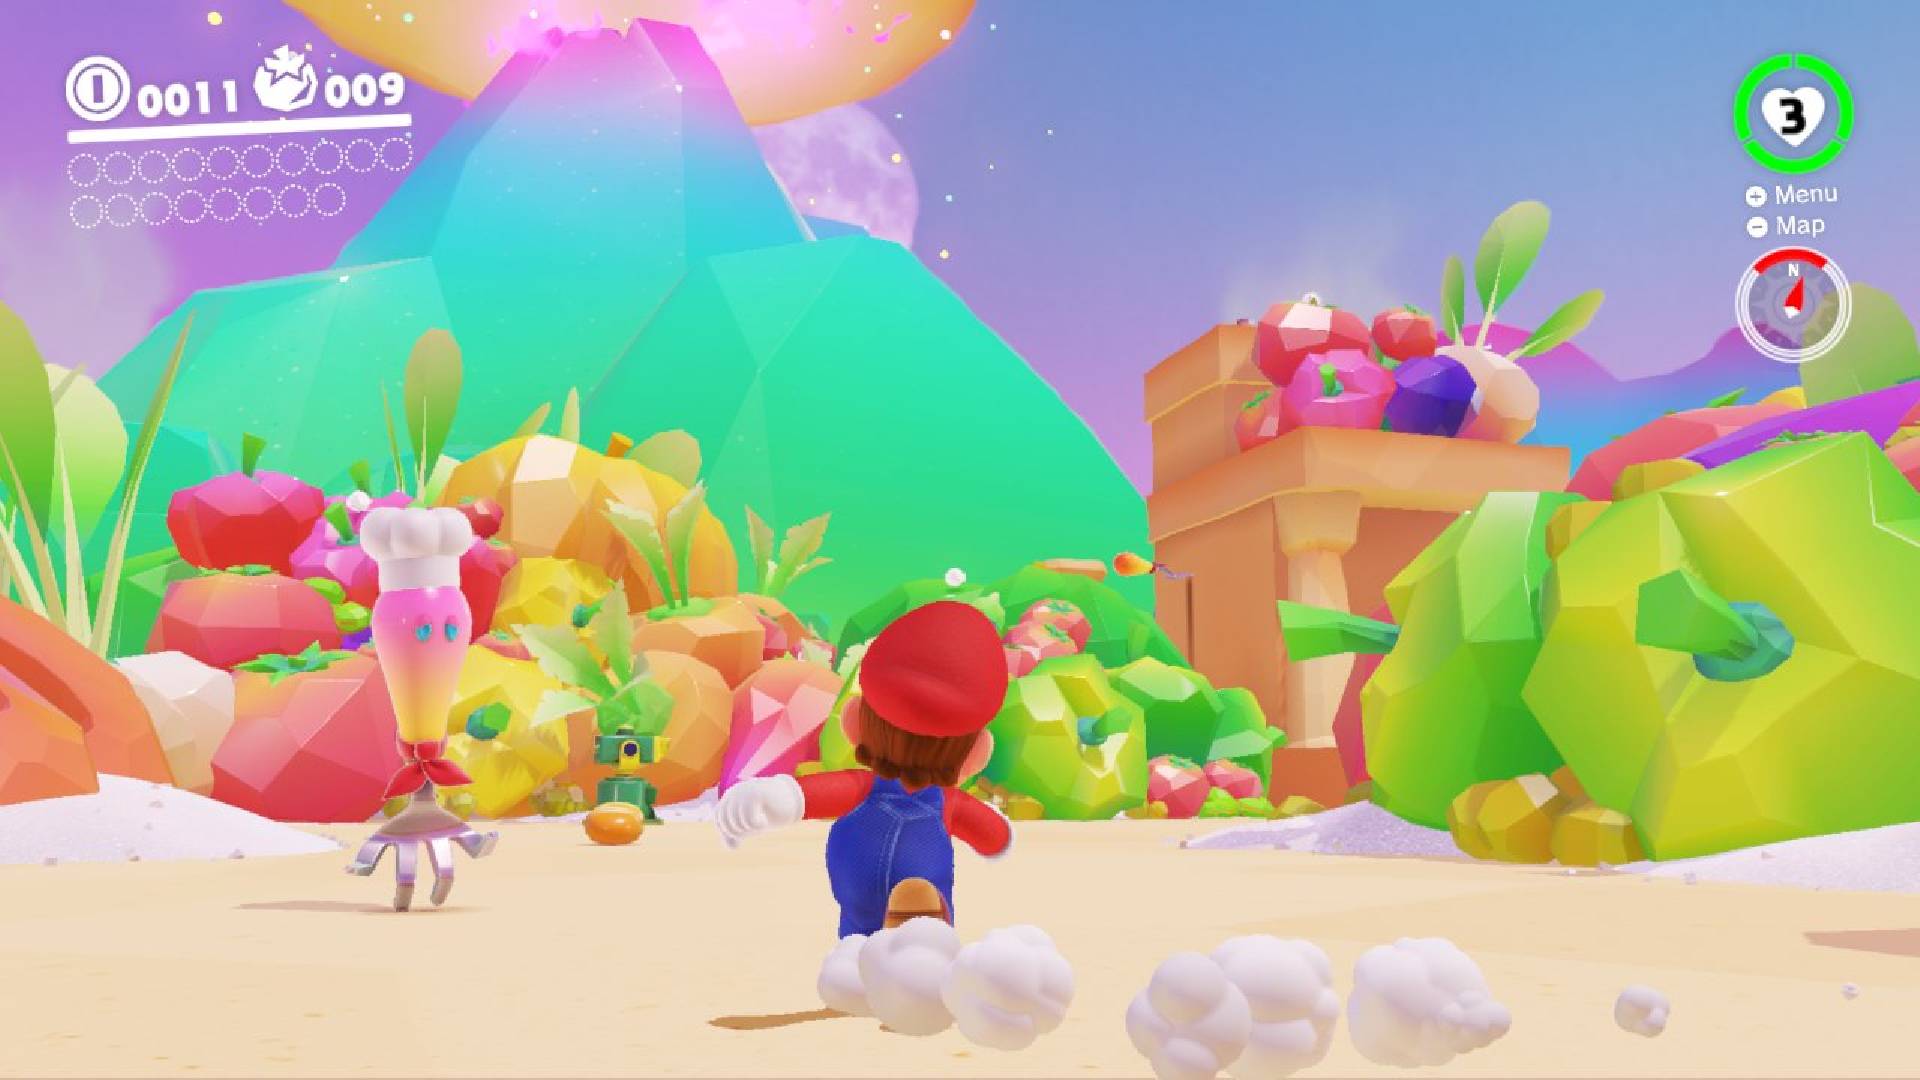 Best Nintendo Switch games: Mario runs around a technicolour level filled with cooking pots and ingredients 